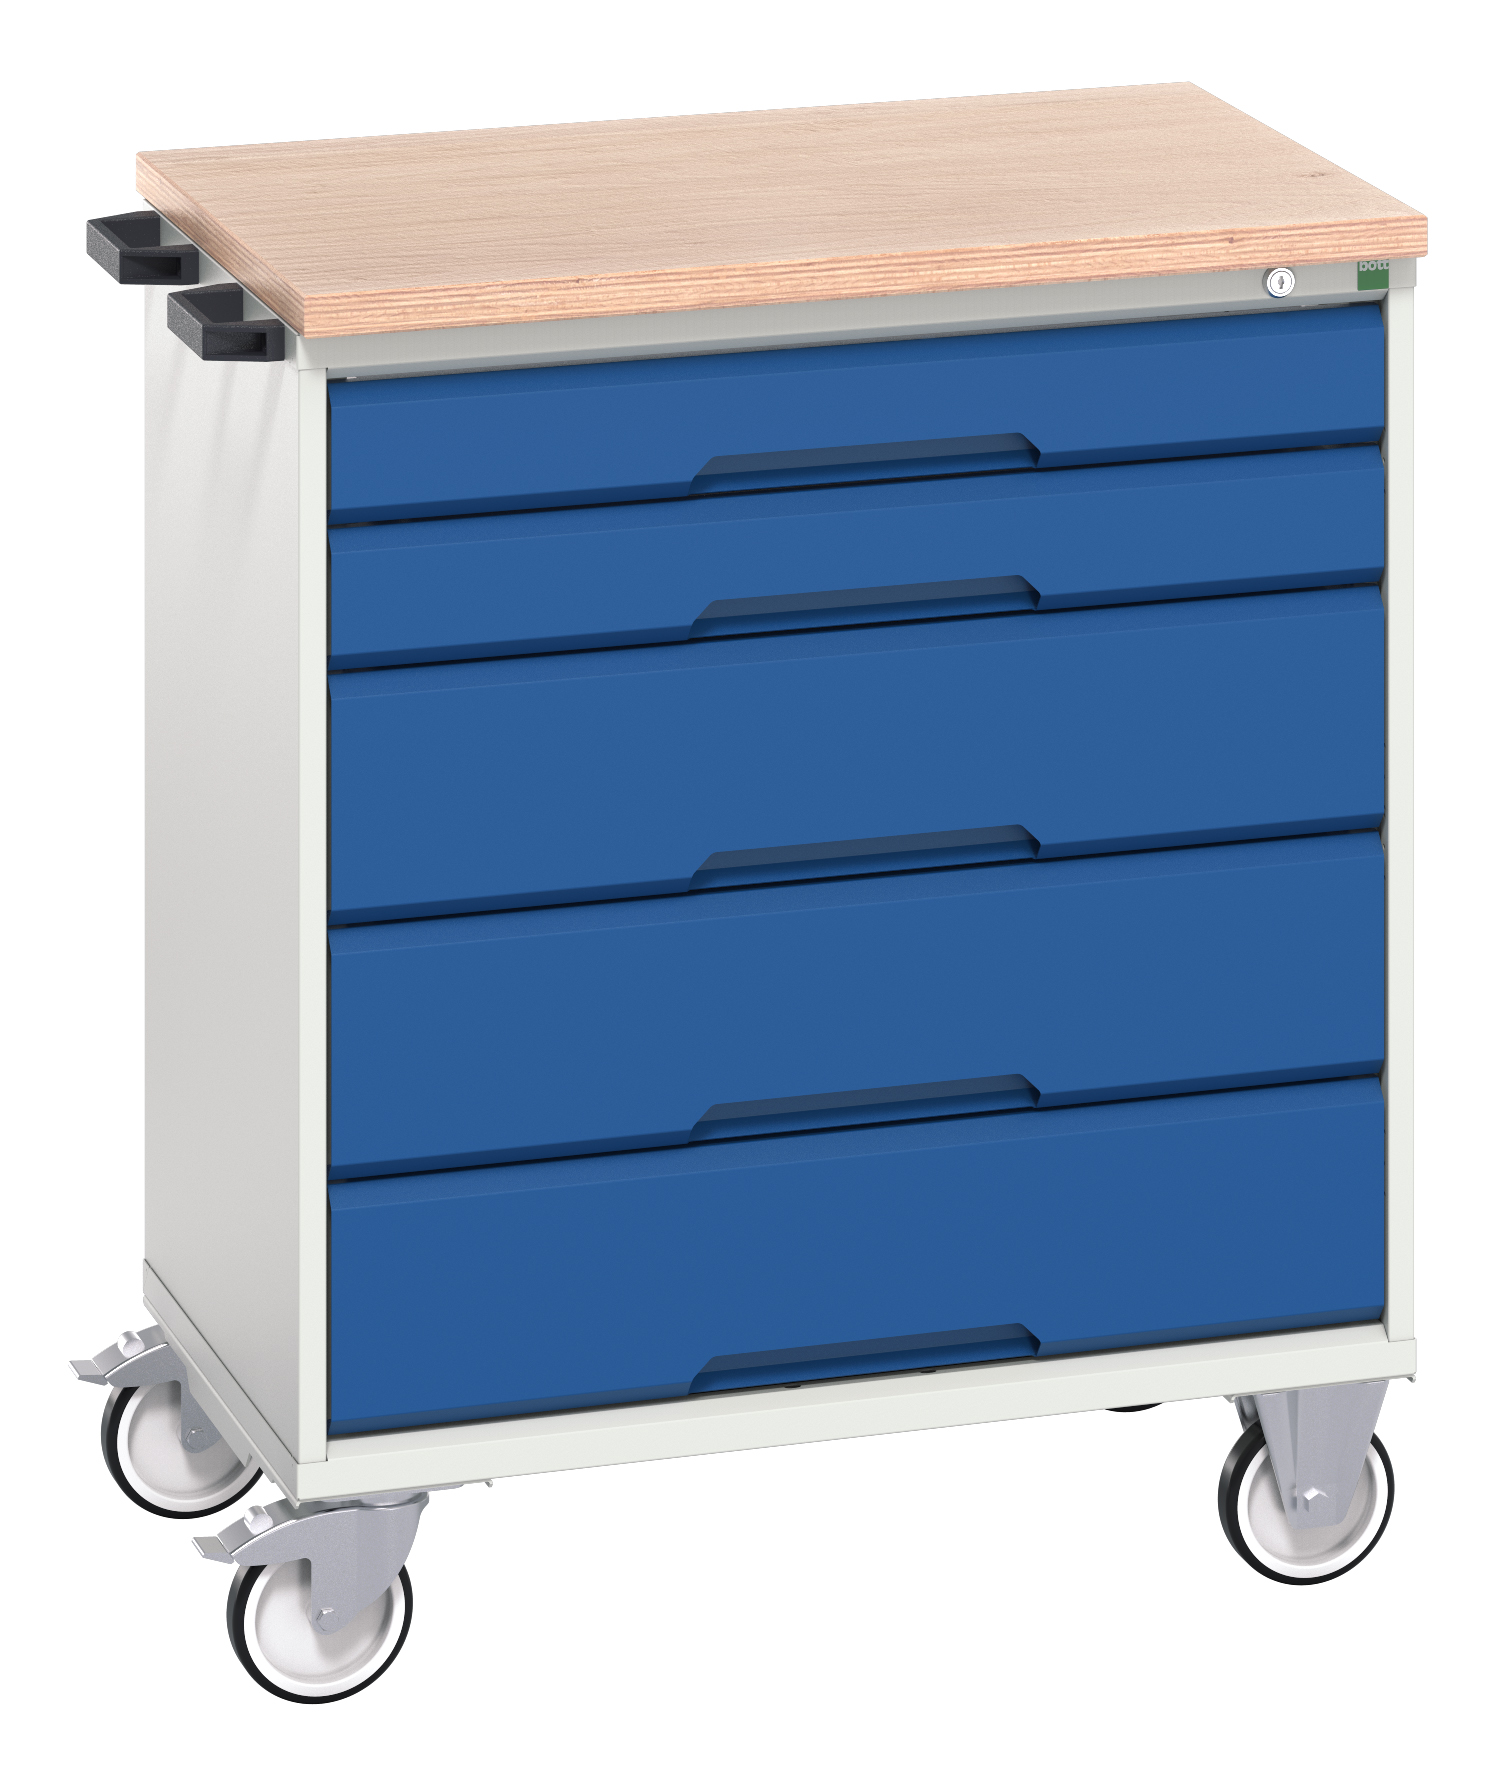 Bott Verso Mobile Drawer Cabinet With 5 Drawers & Multiplex Top - 16927001.11